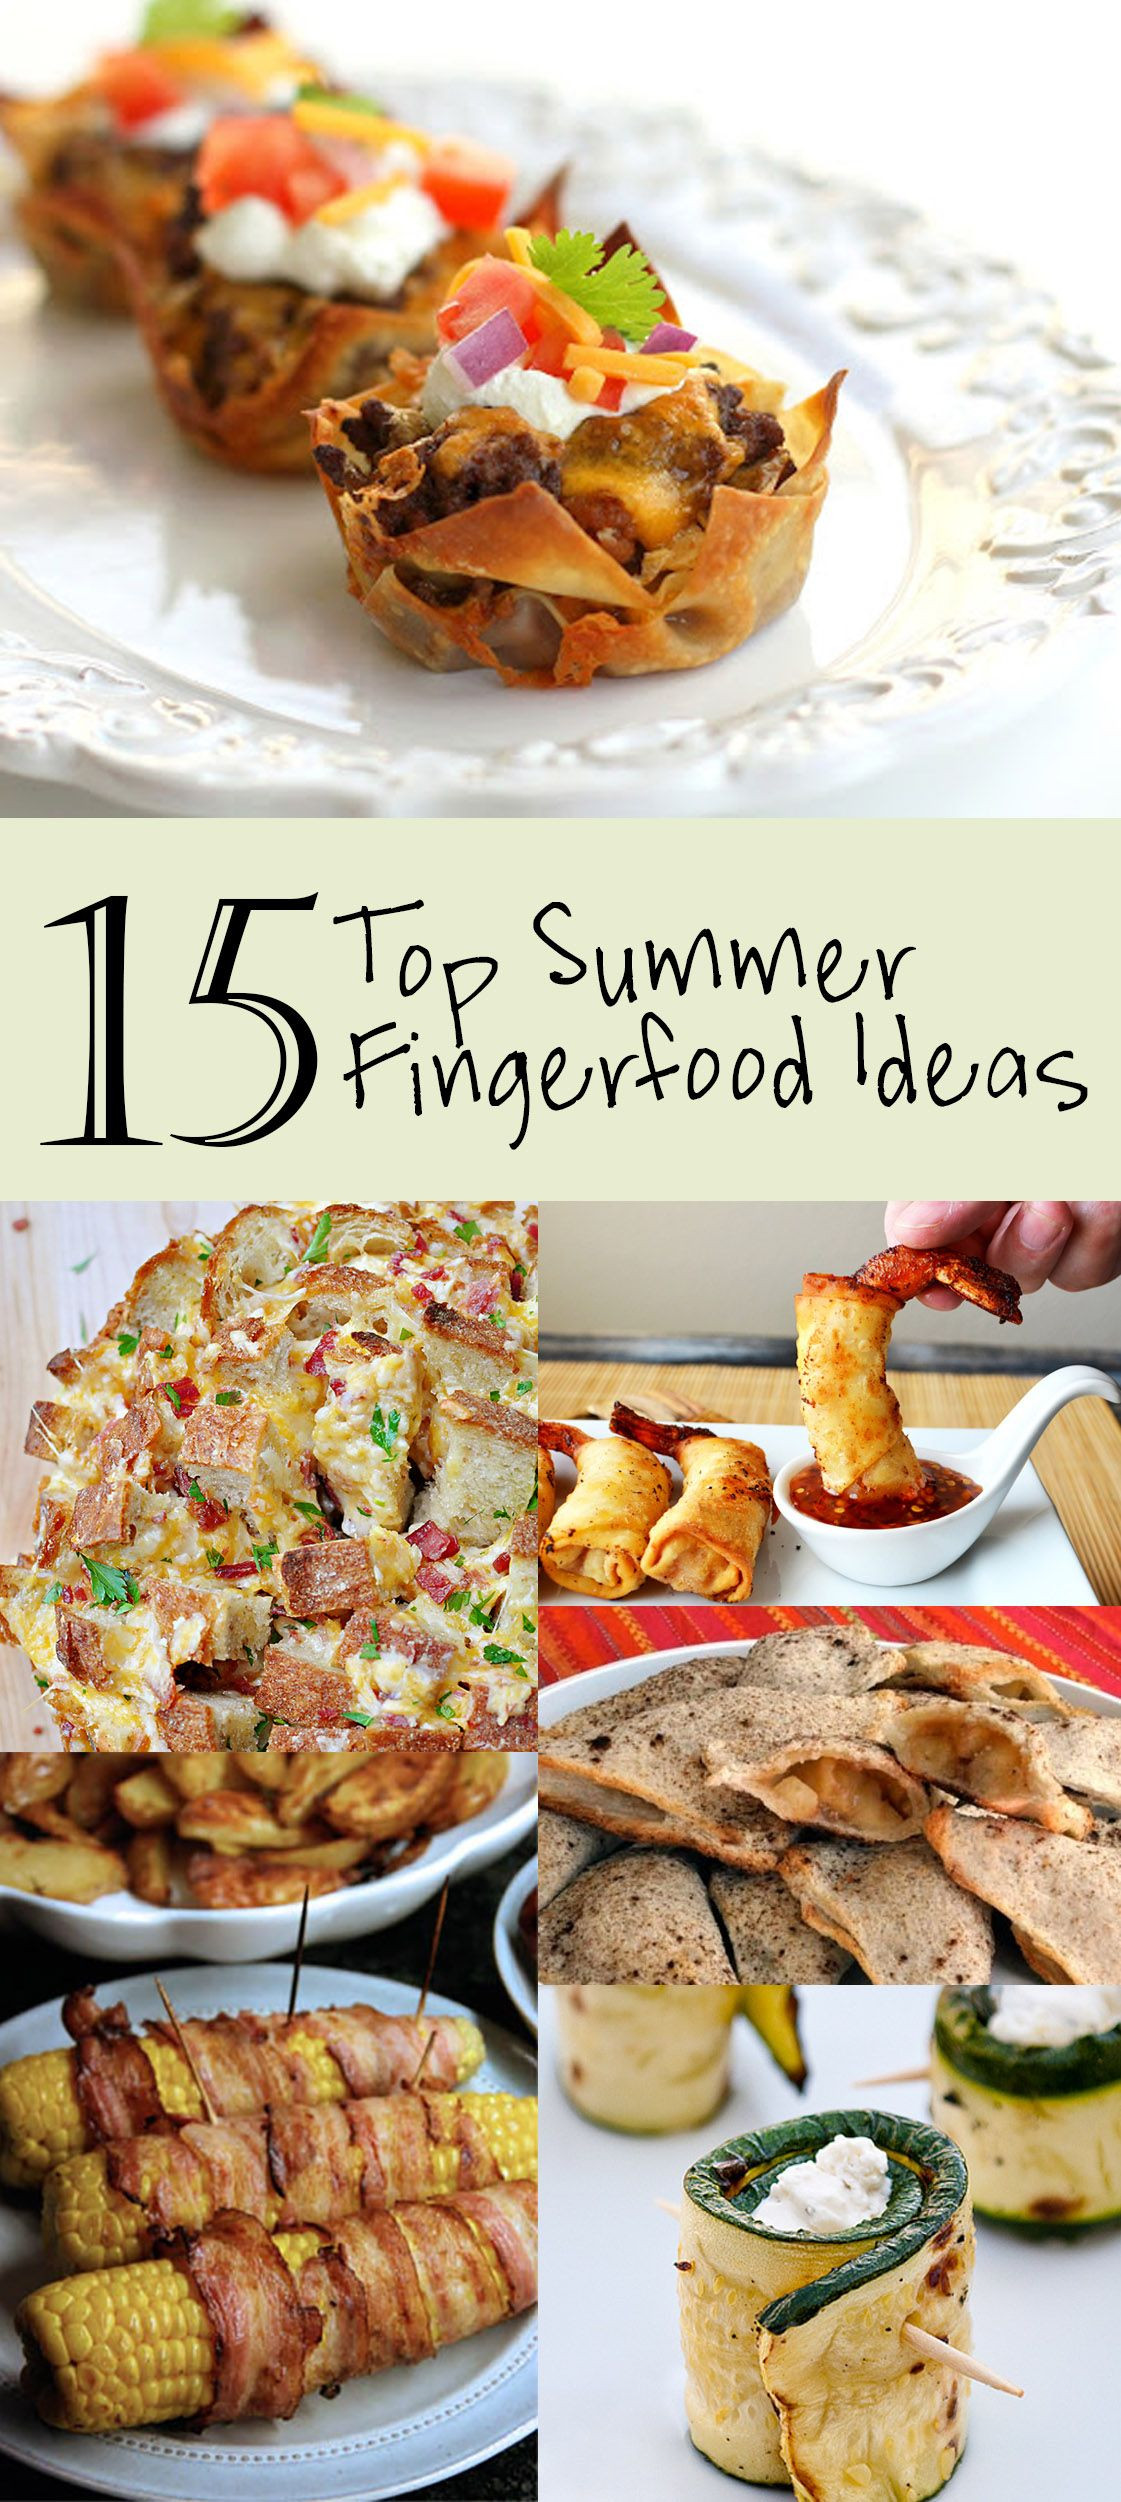 Finger Food Ideas For Summer Party
 Top 15 Summer Finger Food ideas